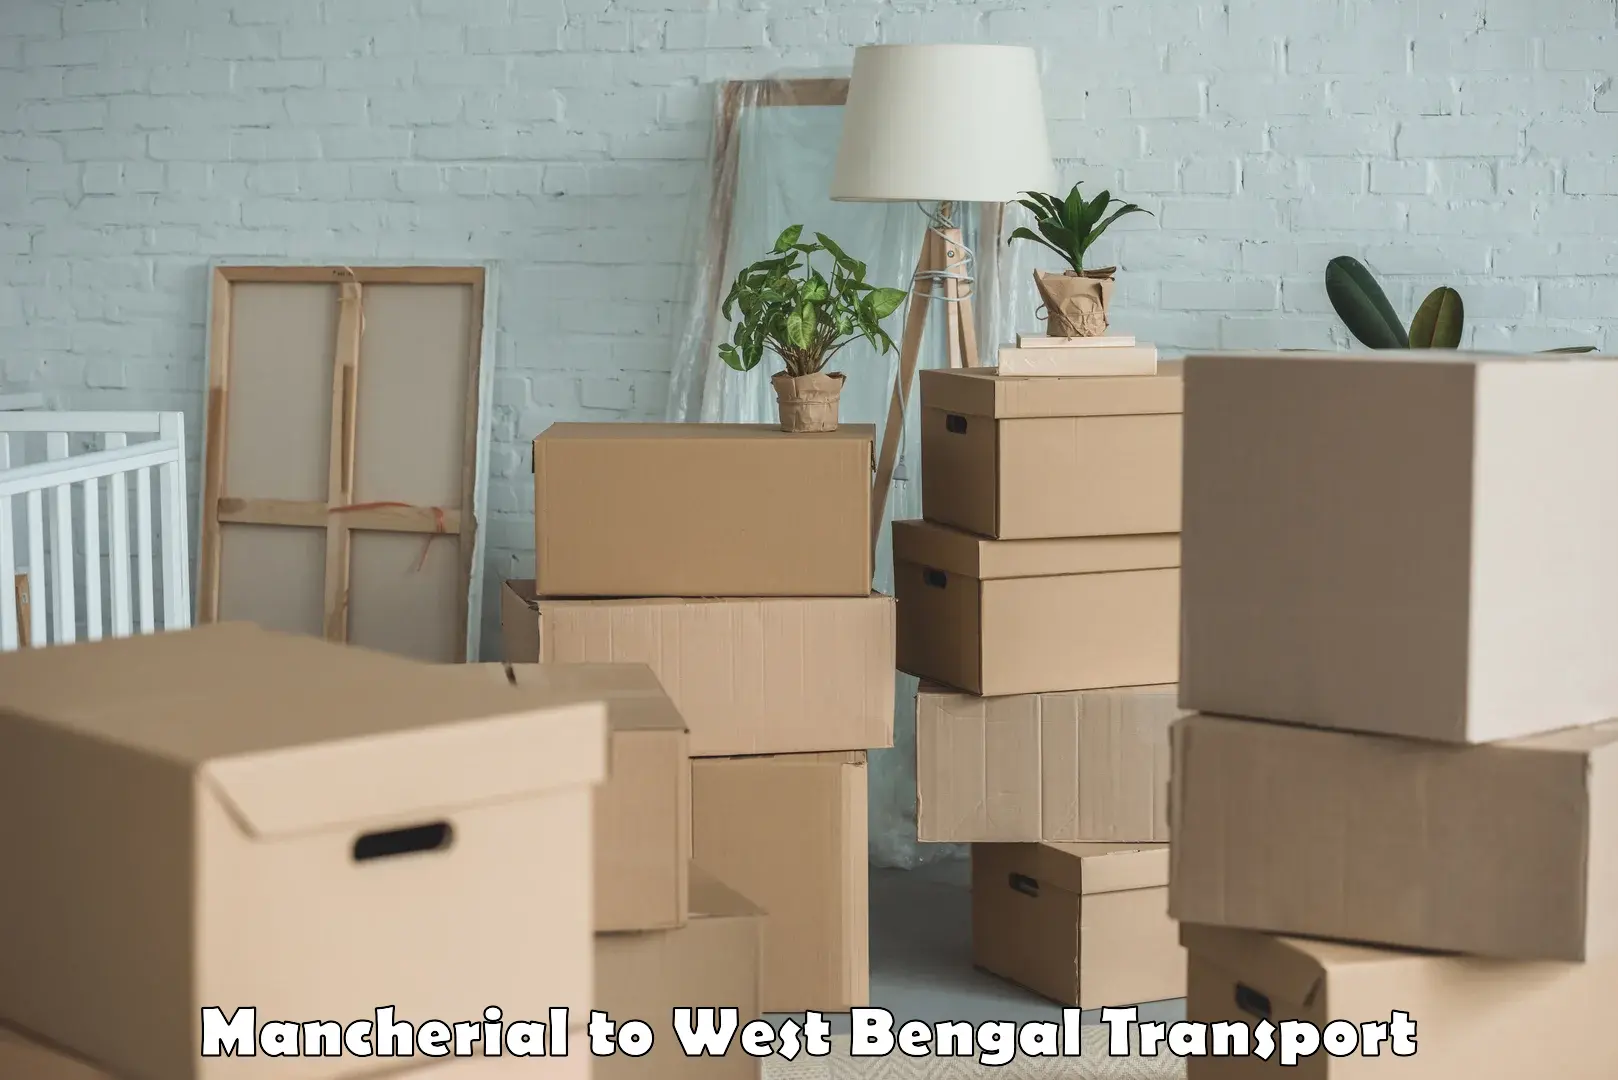 Truck transport companies in India Mancherial to West Bengal